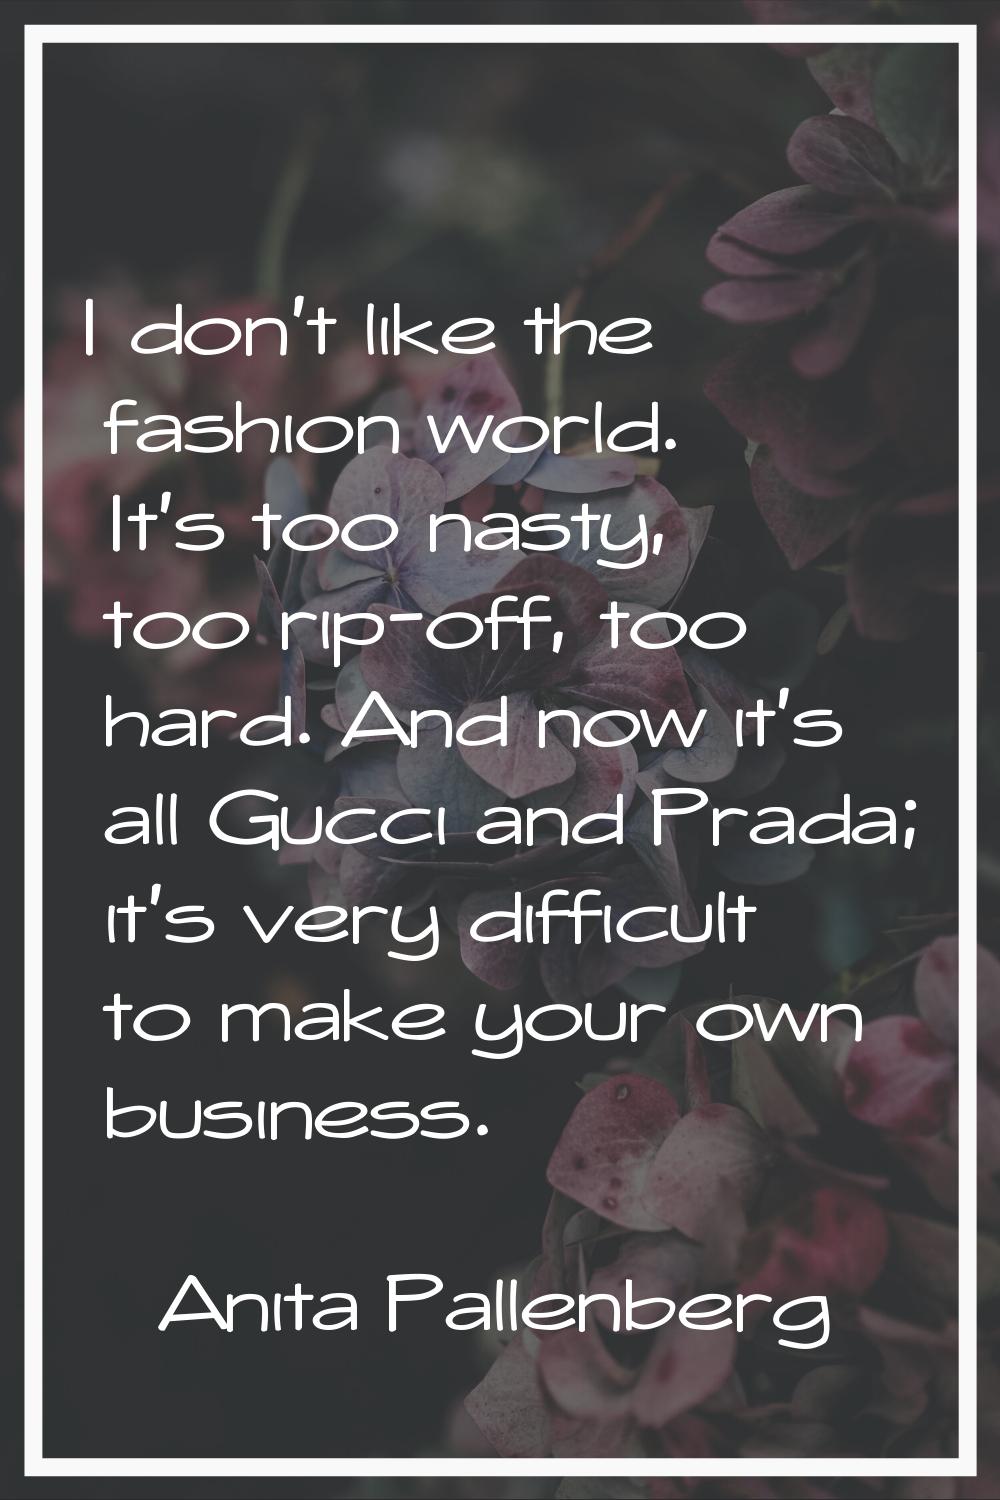 I don't like the fashion world. It's too nasty, too rip-off, too hard. And now it's all Gucci and P